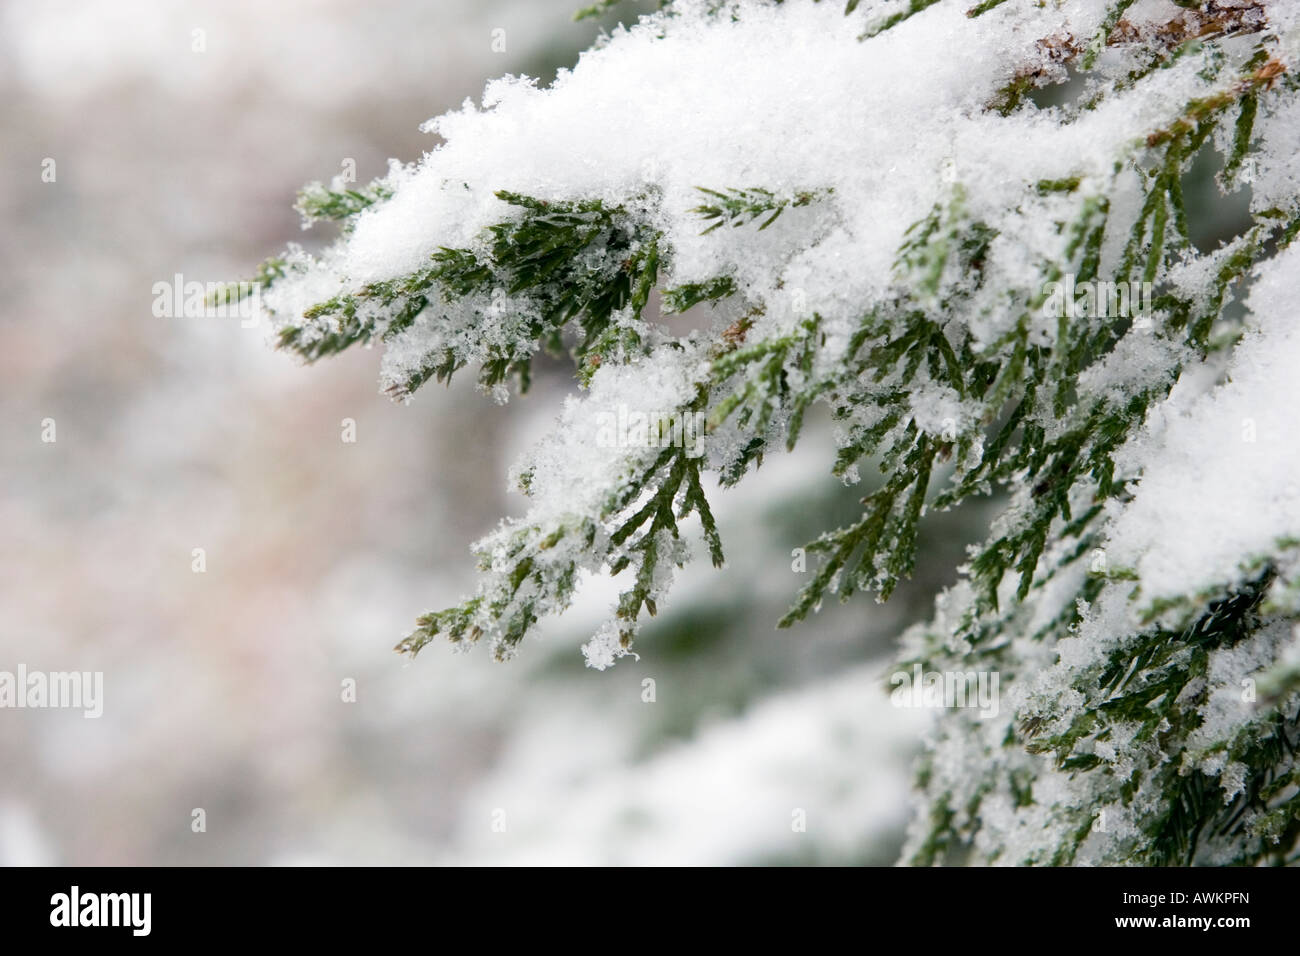 Icy Snow on Blue Point Juniper Branches Stock Photo